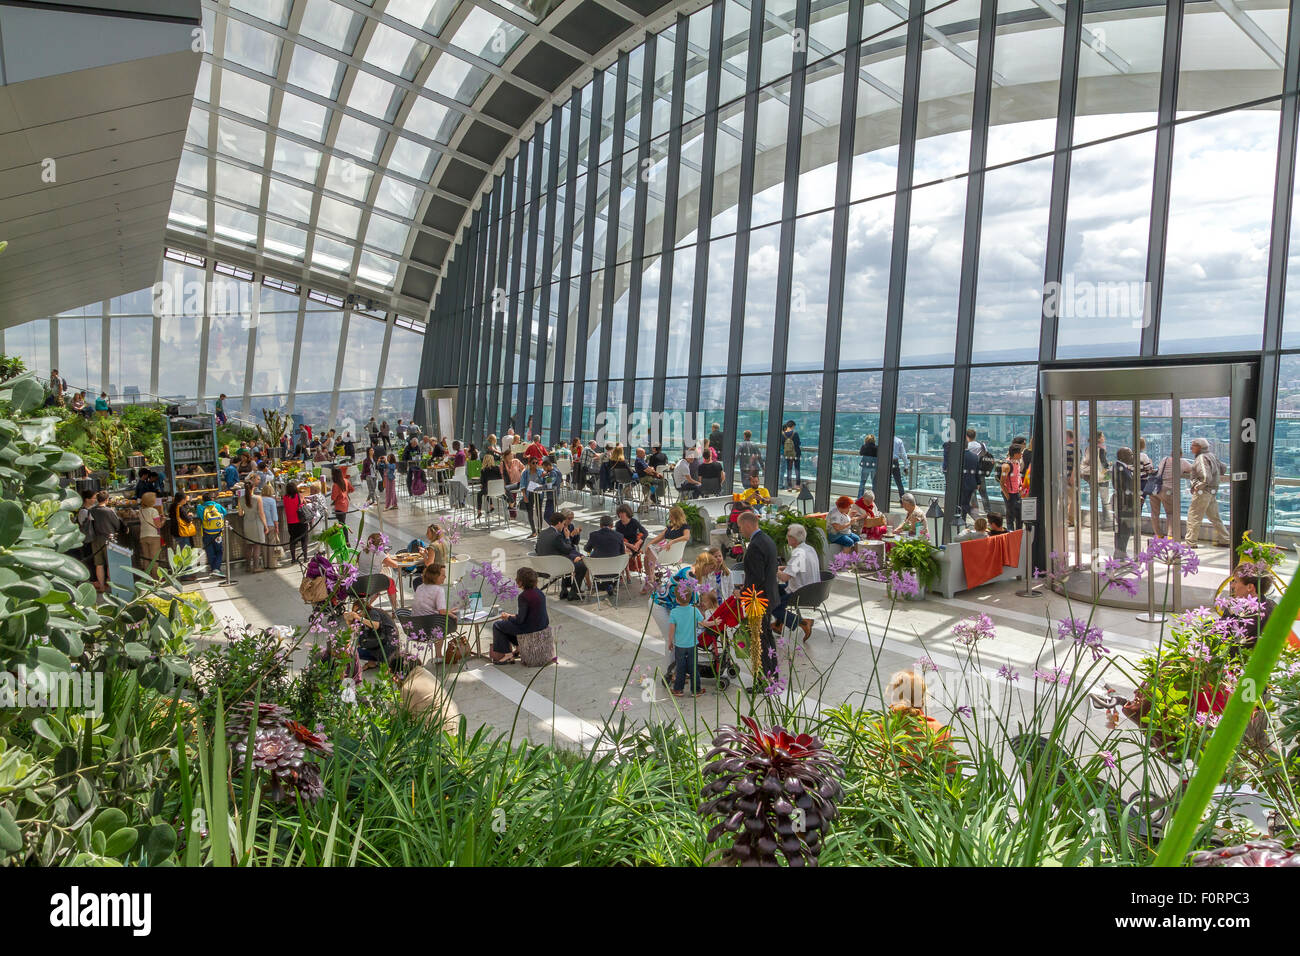 The Sky Garden, a public viewing gallery at the top of 20 Fenchurch Street  also known as The Walkie Talkie Building ,in The City Of London, UK Stock  Photo - Alamy